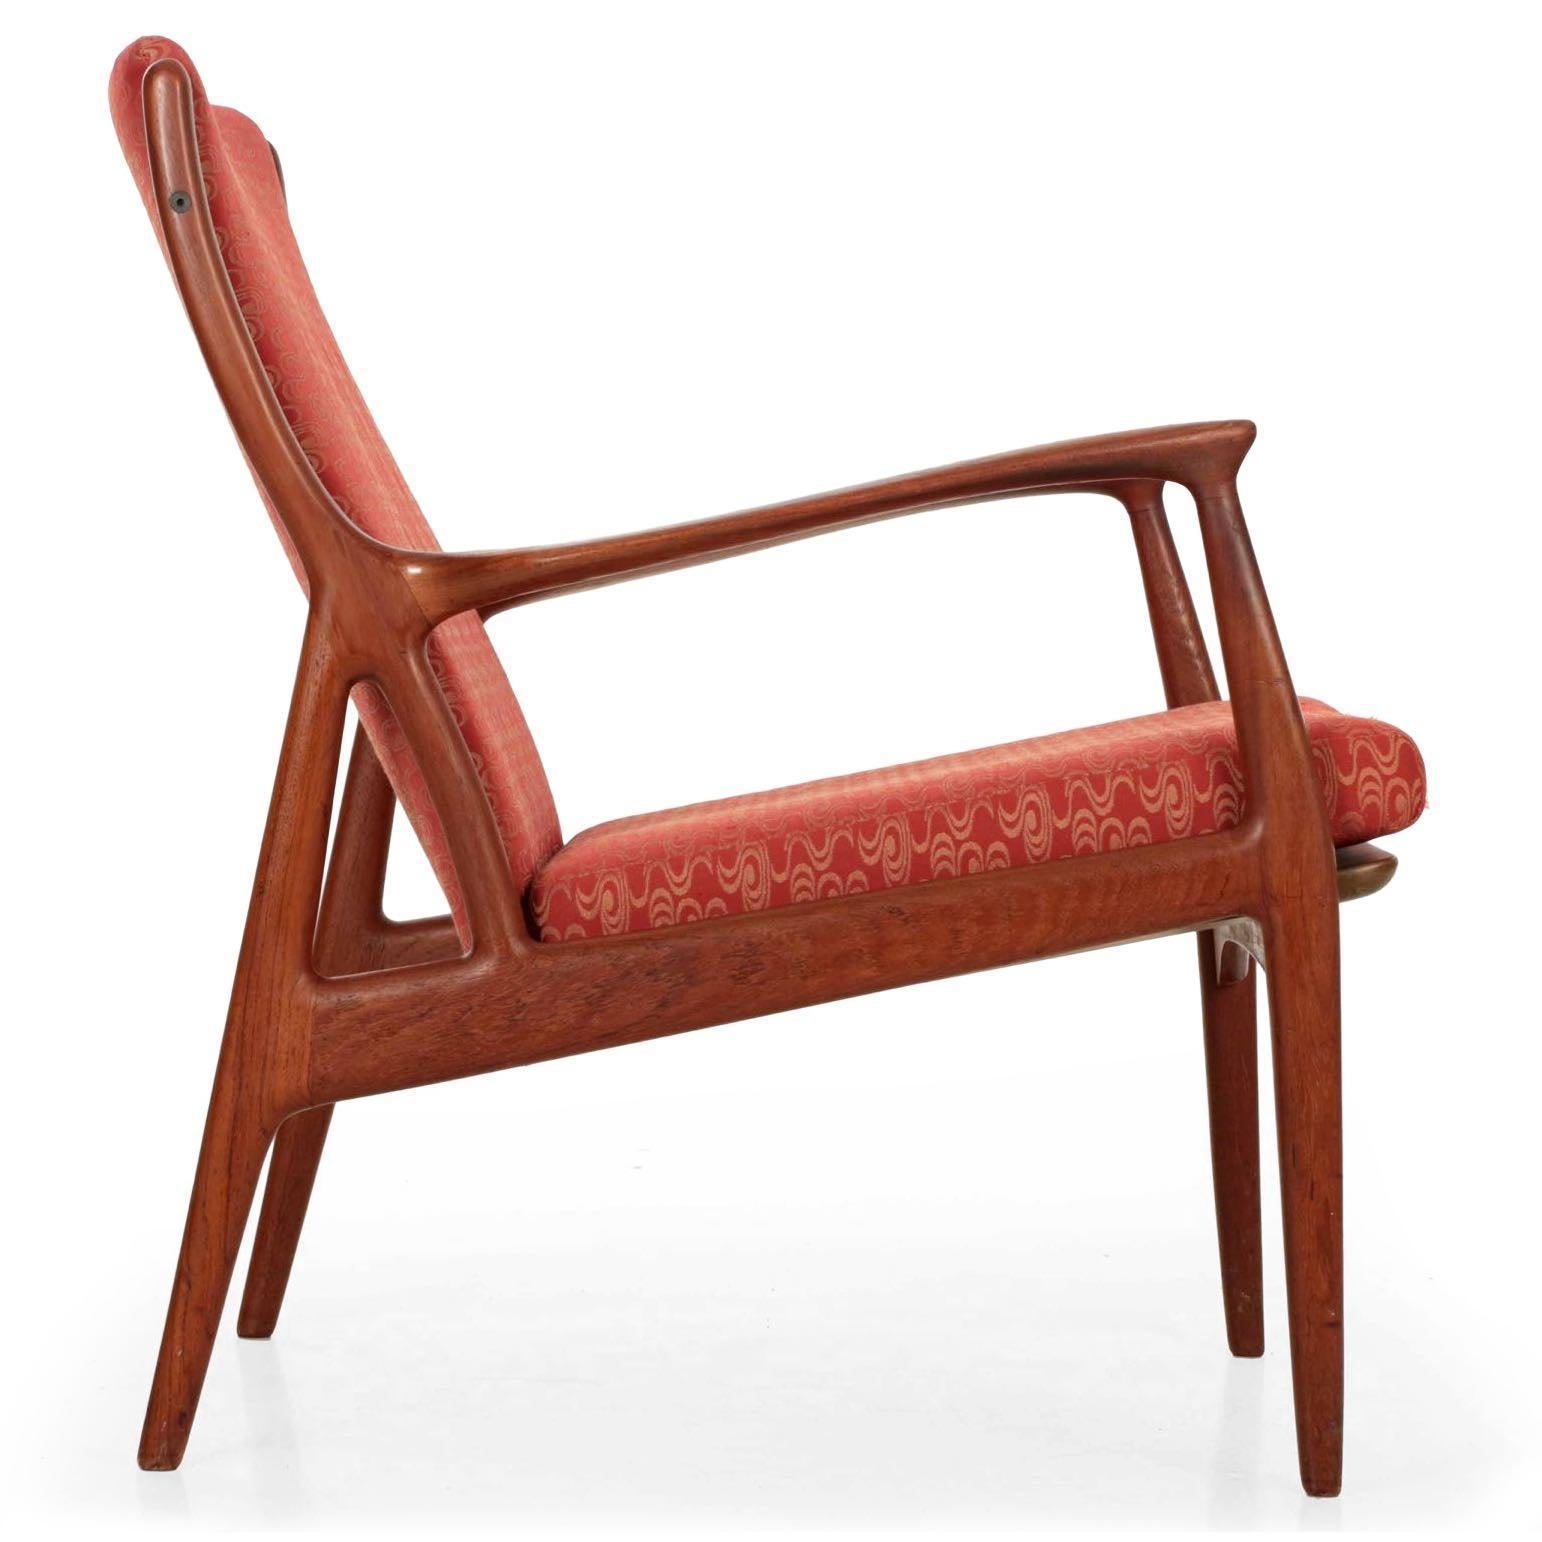 Designed by Erik Kollig Andersen and Palle Pedersen and manufactured by Horsnaes in Denmark, this fine sculpted teak arm chair exhibits exceptional craftsmanship. A distinctly organic form with relentless curvature set against sharp geometry, the